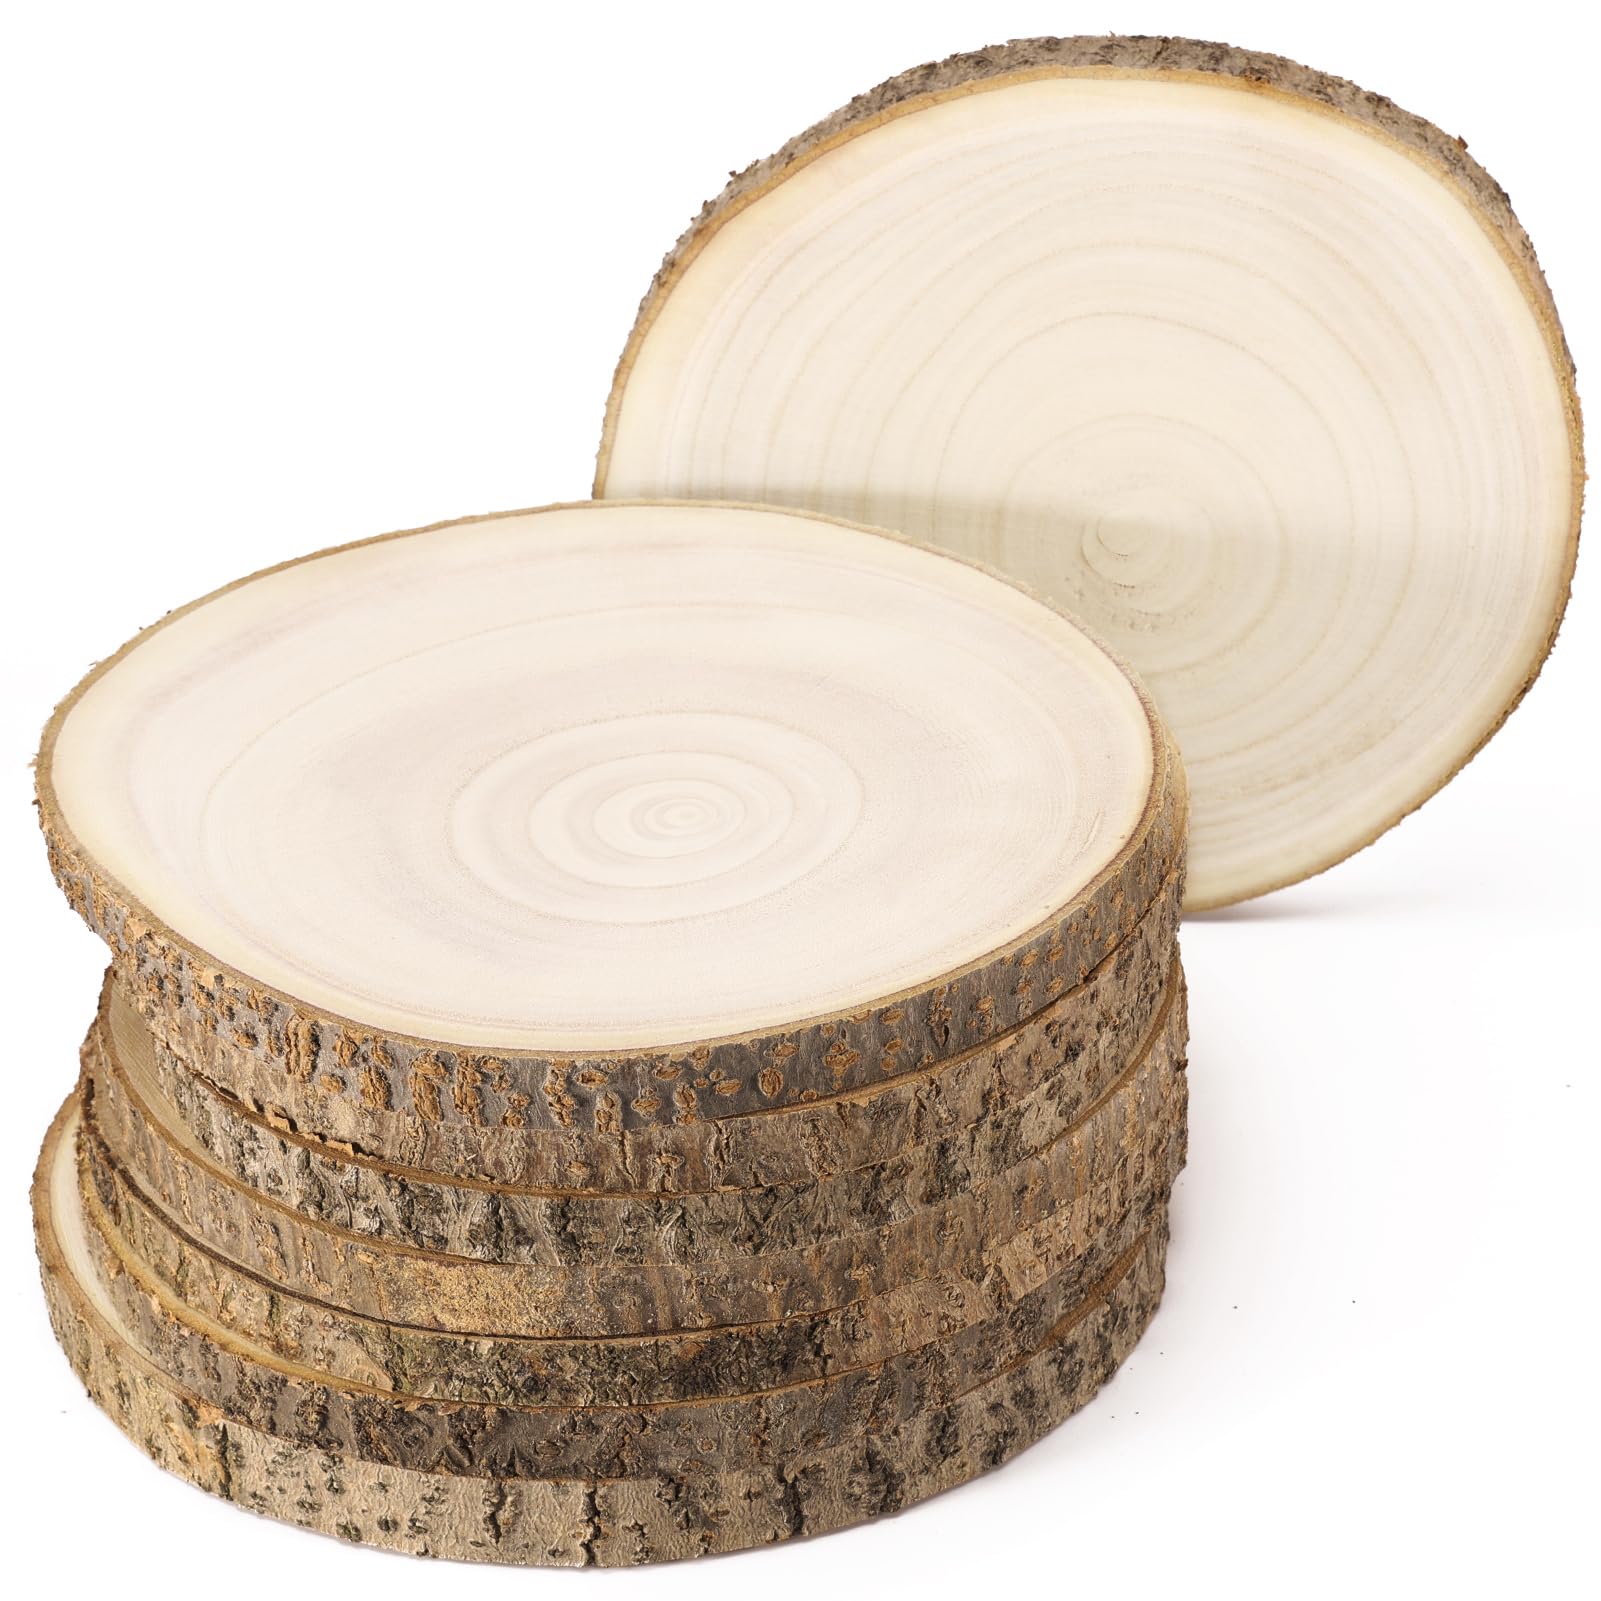 5 Pack 6-7 Inch Natural Wood Slices for Centerpieces, Wood Slice DIY  Projects